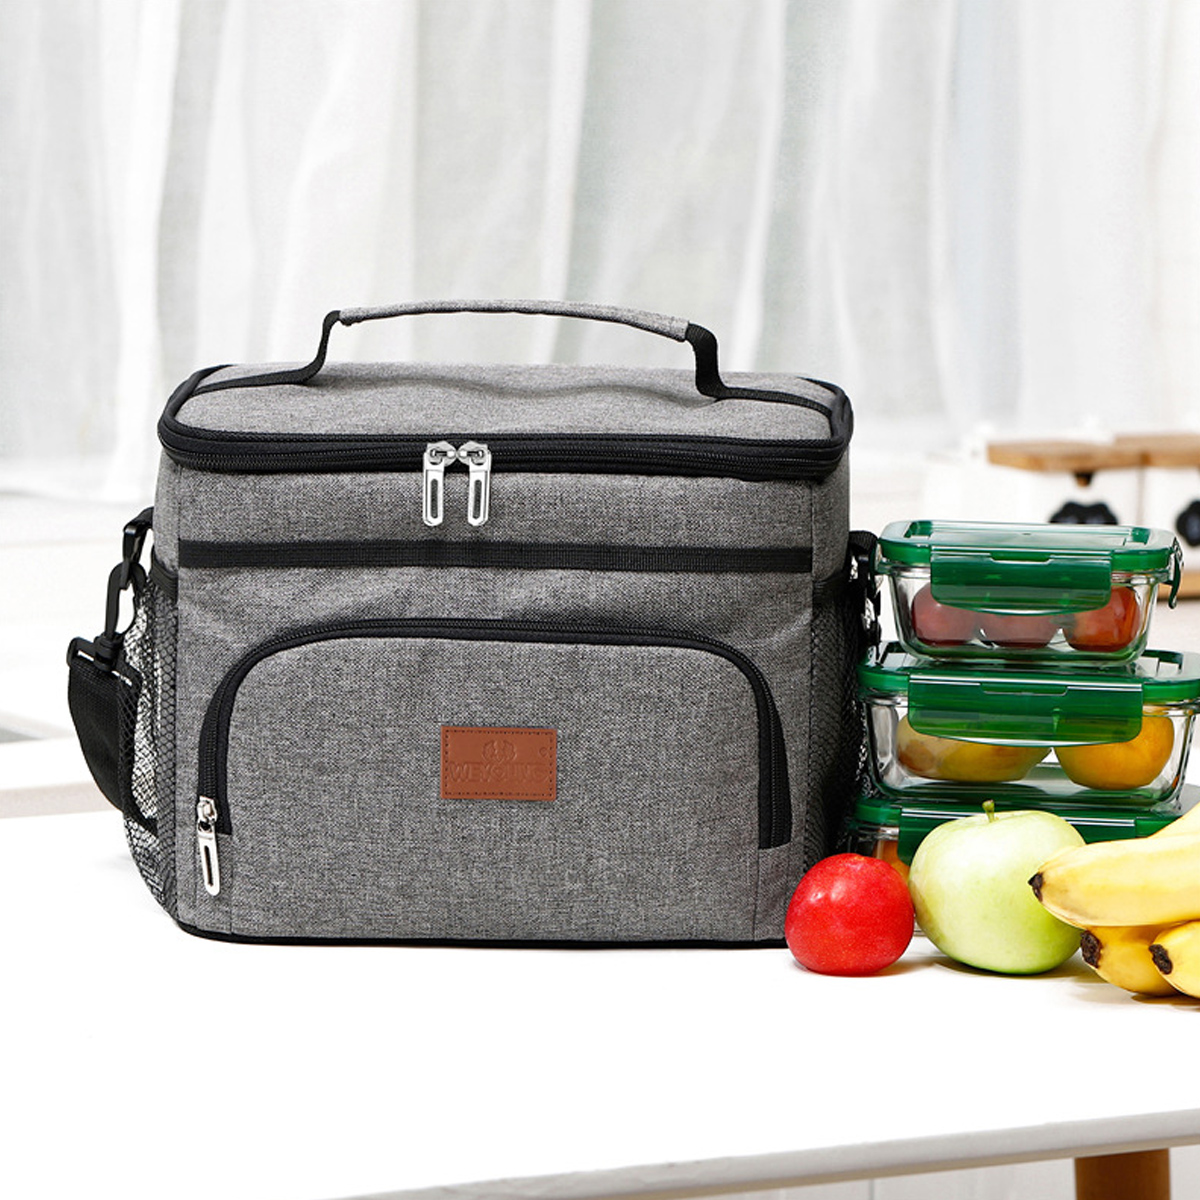 15L-Insulated-Picnic-Bag-Thermal-Food-Container-Handbag-Lunch-Bag-Outdoor-Camping-Travel-1872430-7